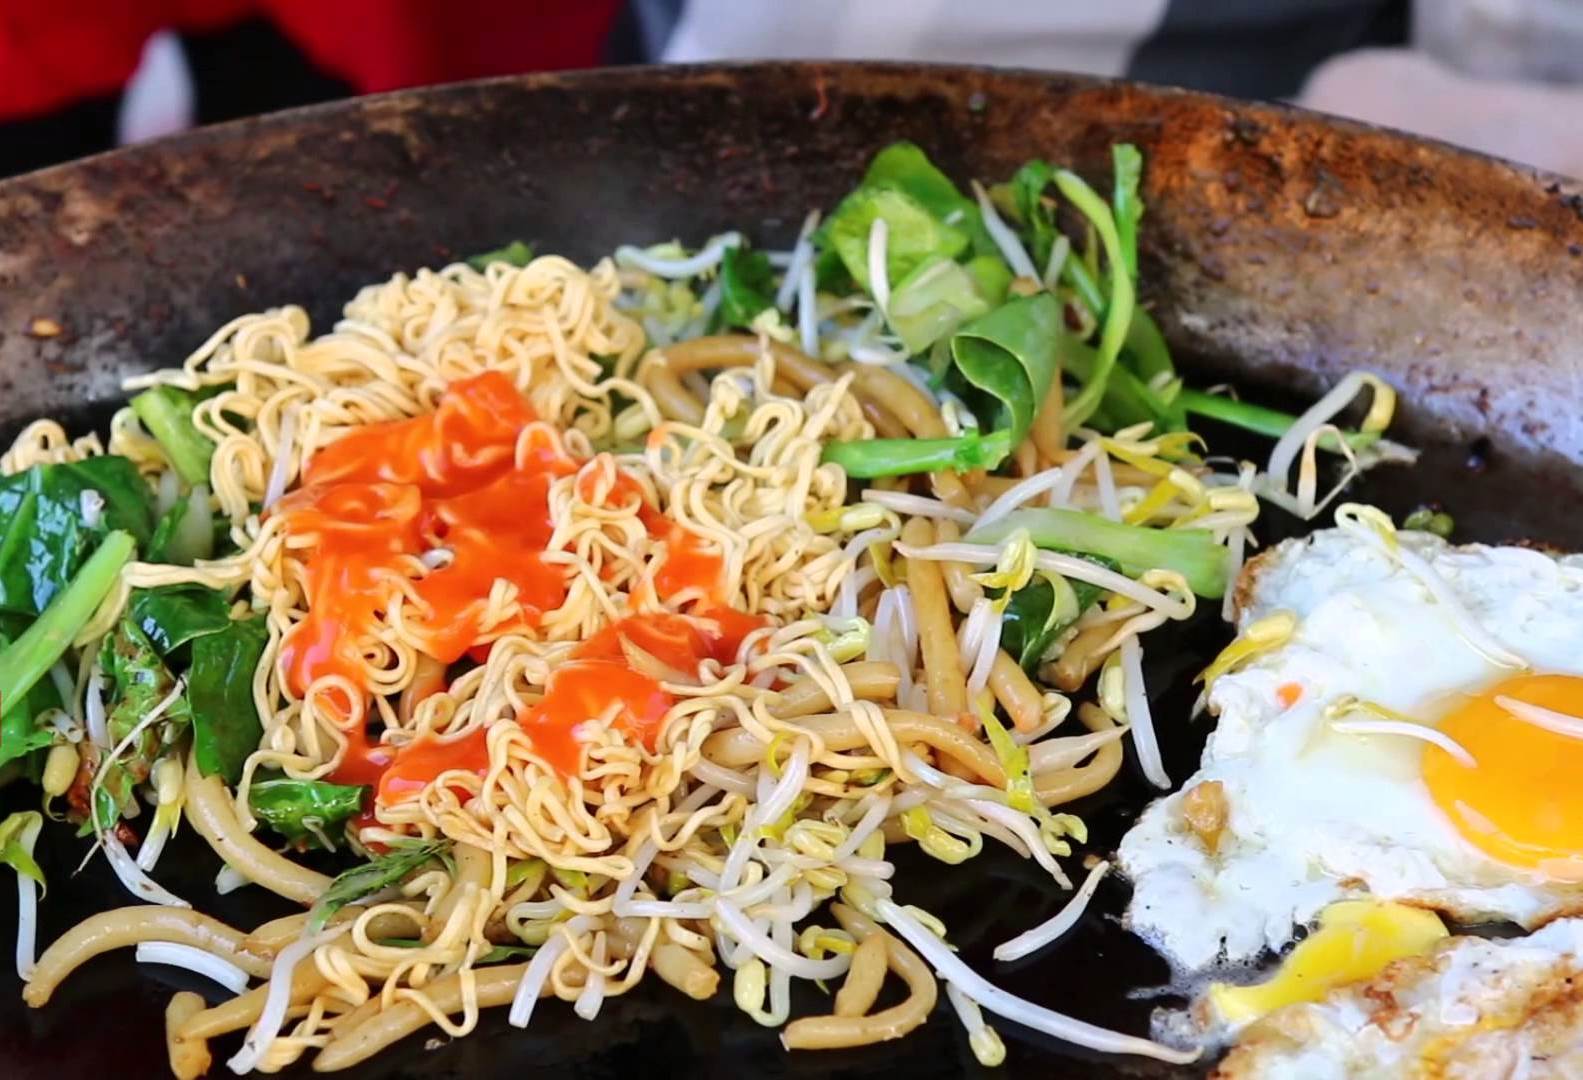 EXPLORE YOUR CAMBODIA DAY TOUR WITH THE BEST STREET FOODS